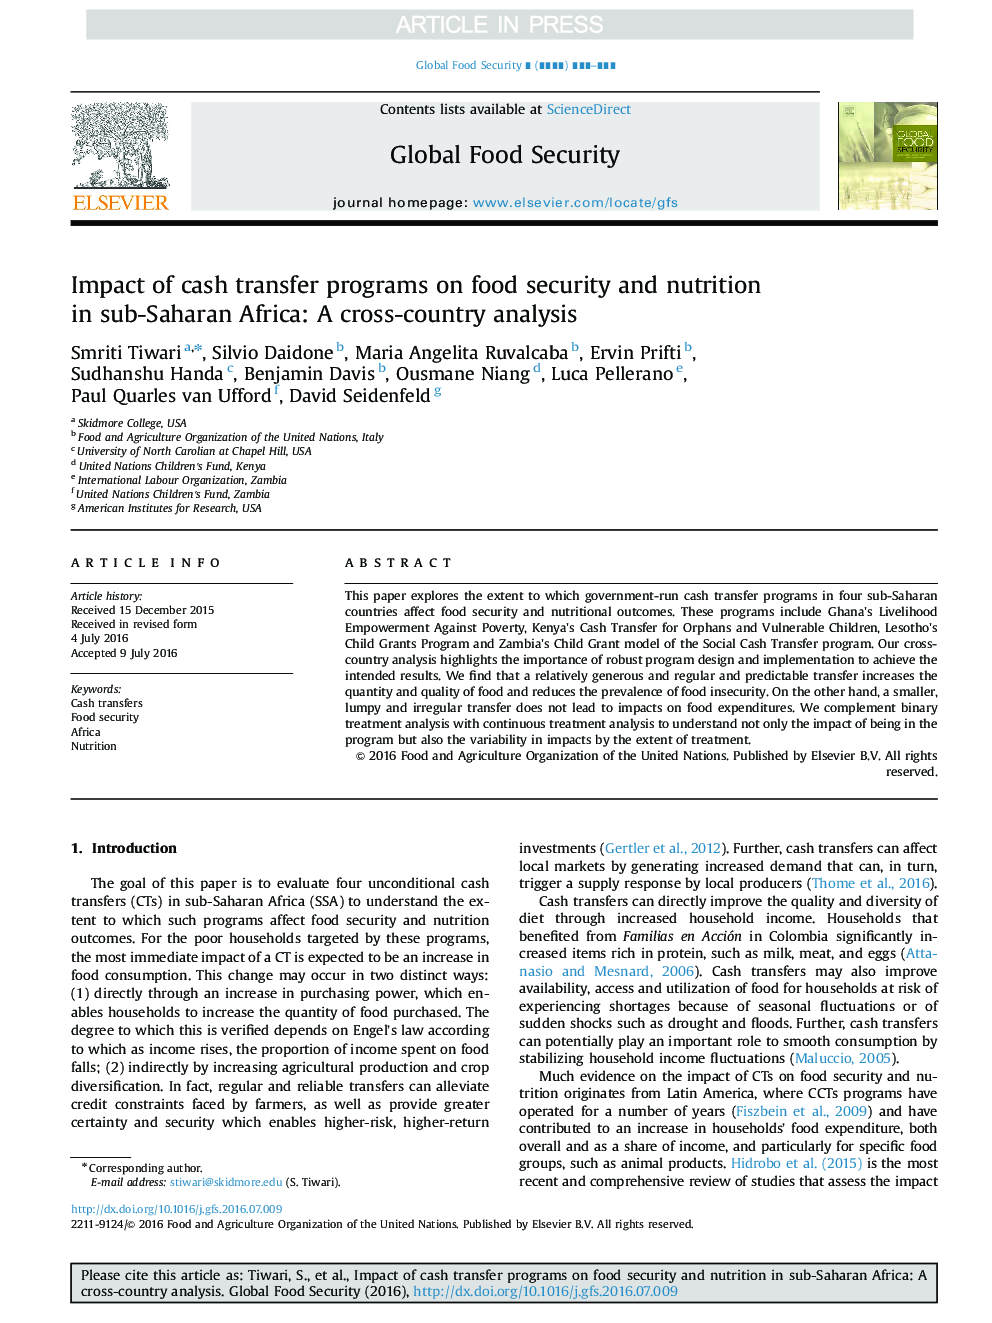 Impact of cash transfer programs on food security and nutrition in sub-Saharan Africa: A cross-country analysis